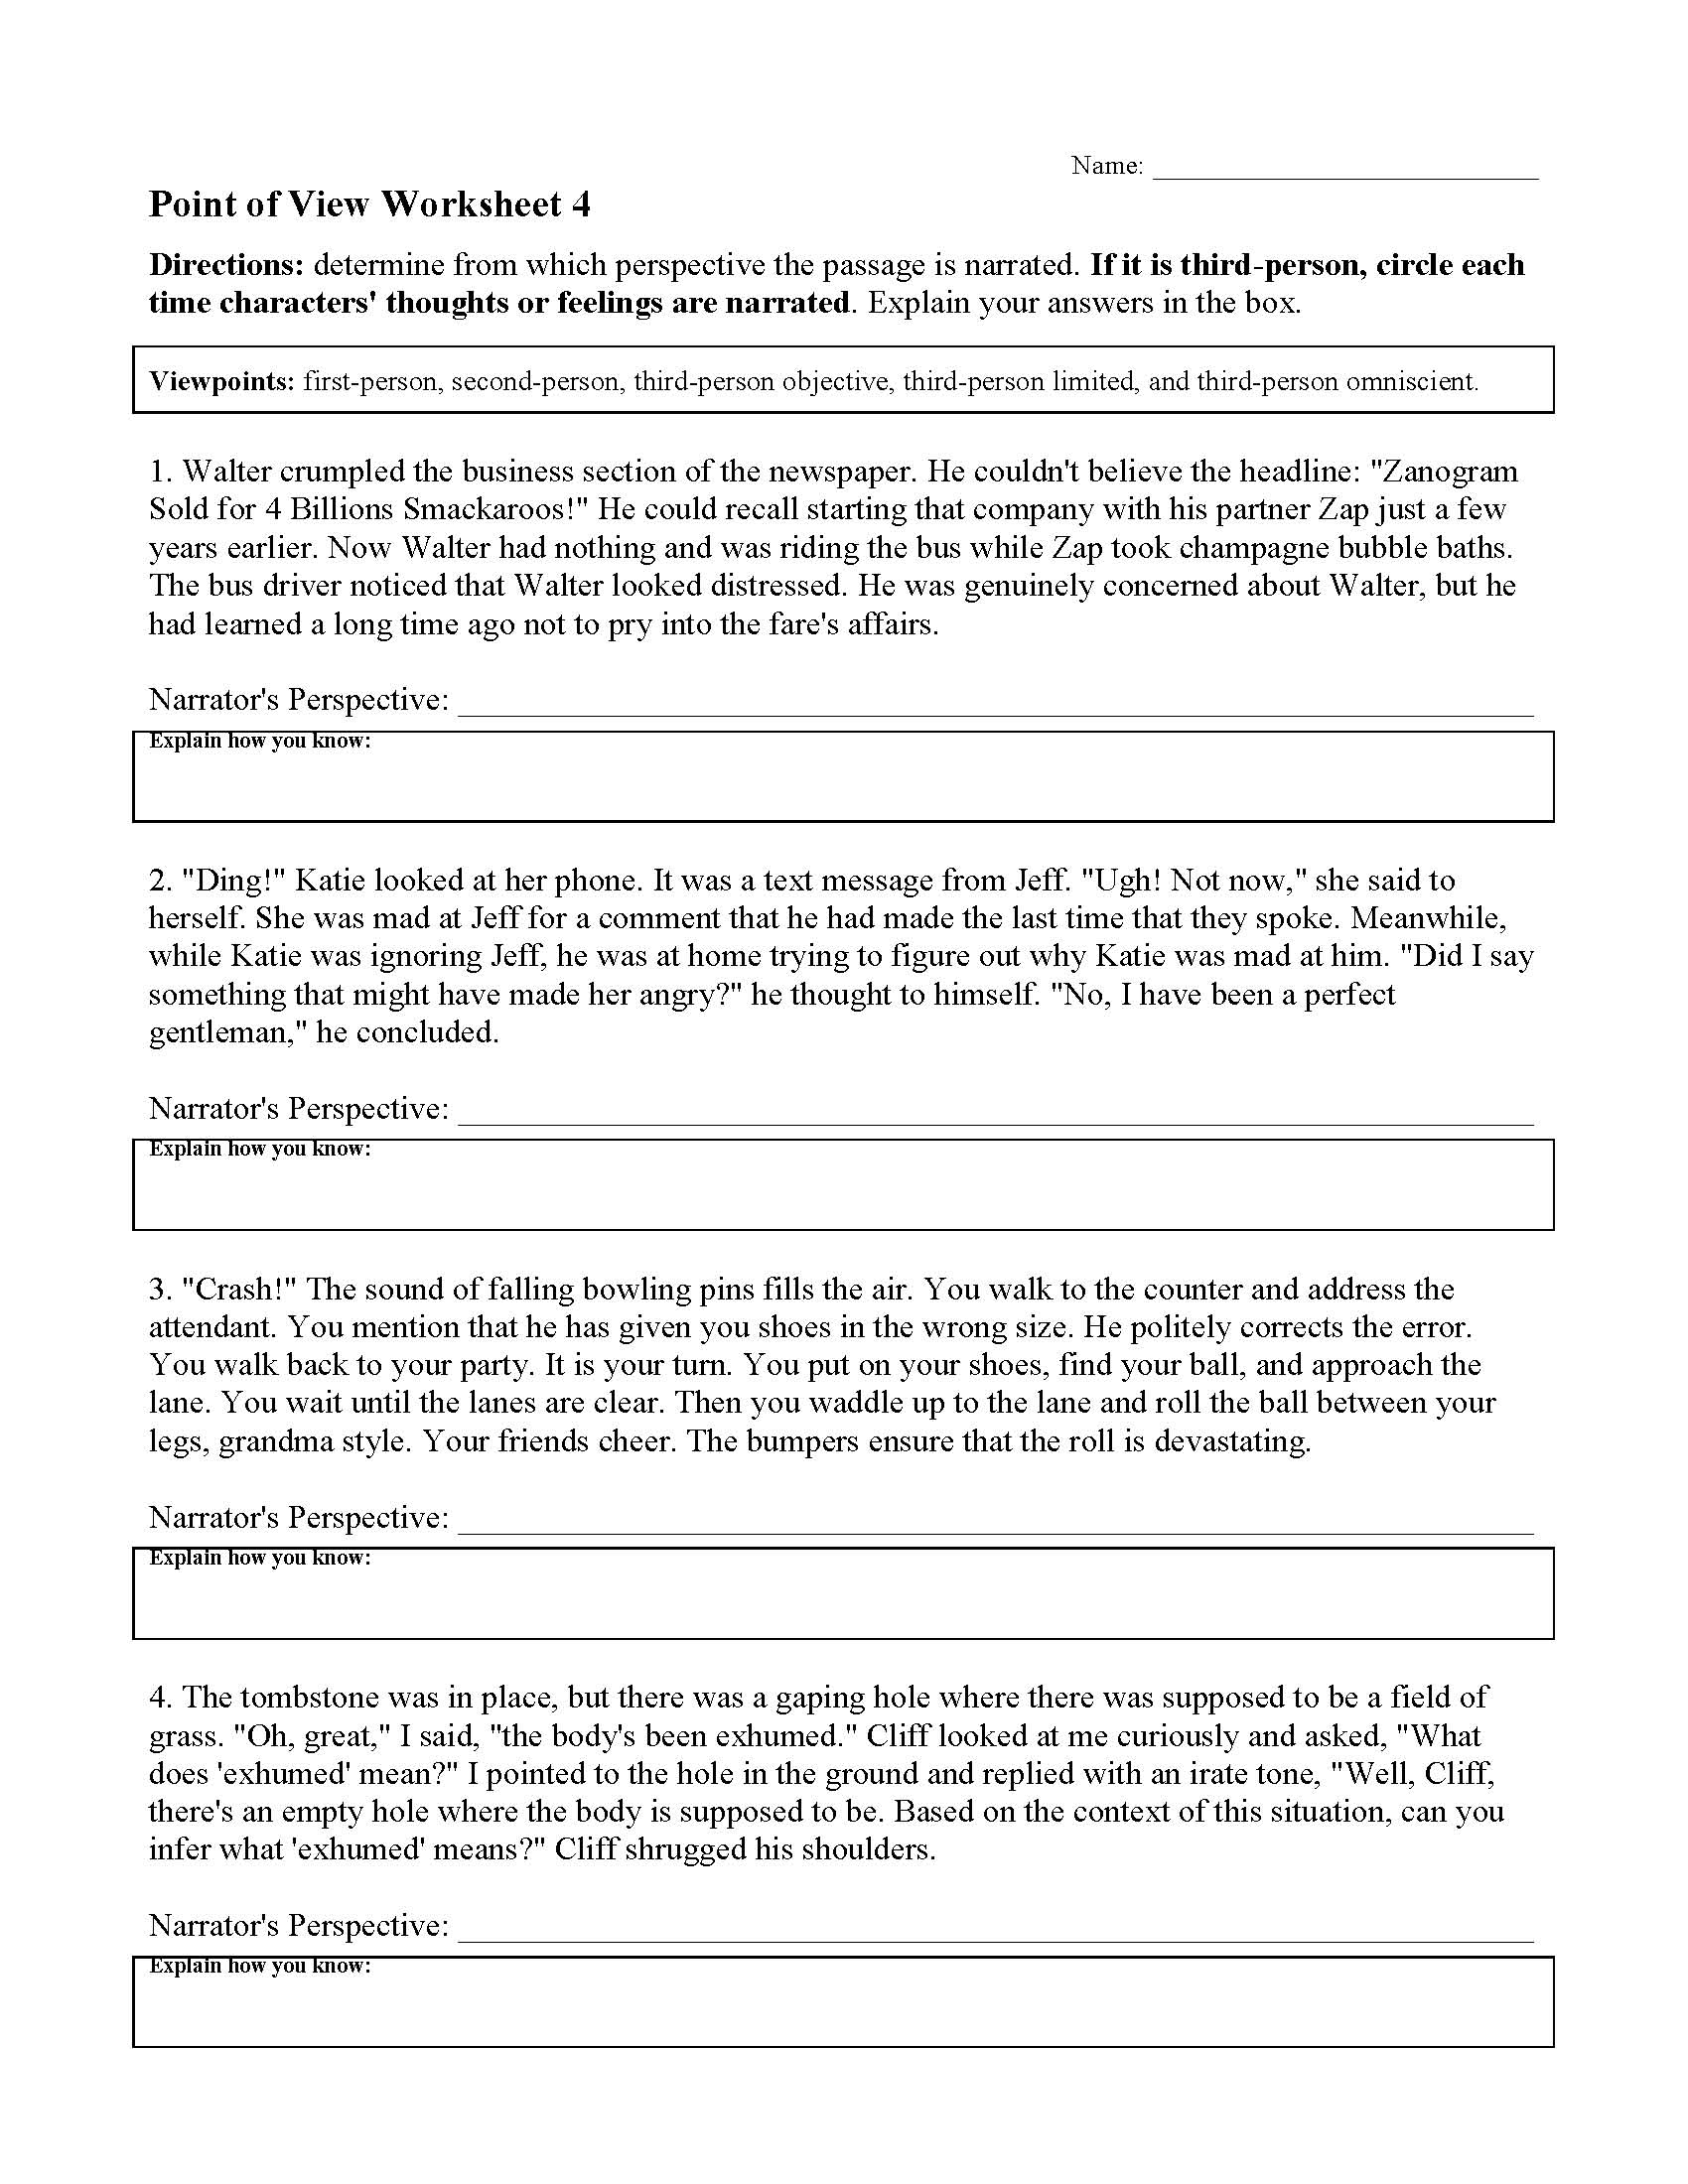 This is a preview image of Point of View Worksheet 4. Click on it to enlarge it or view the source file.